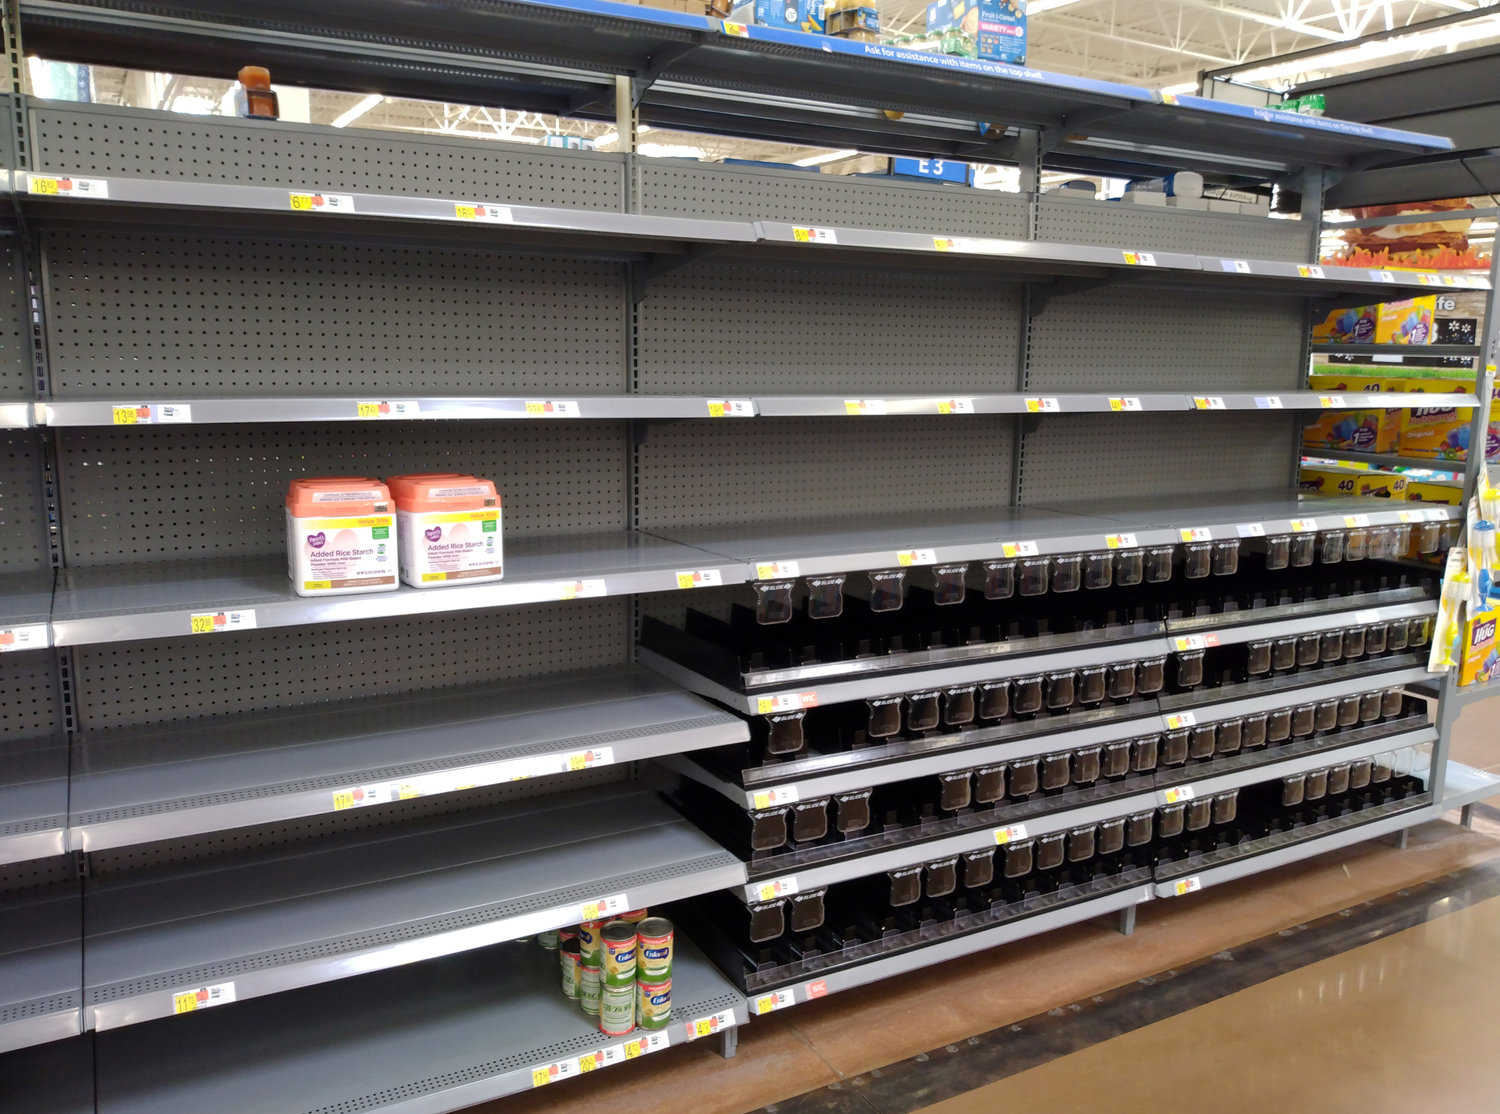 Shelves for baby formula site almost completely empty May 14, 2022, at a Walmart store in Dallas, Ga. (Index/Henry Durand)